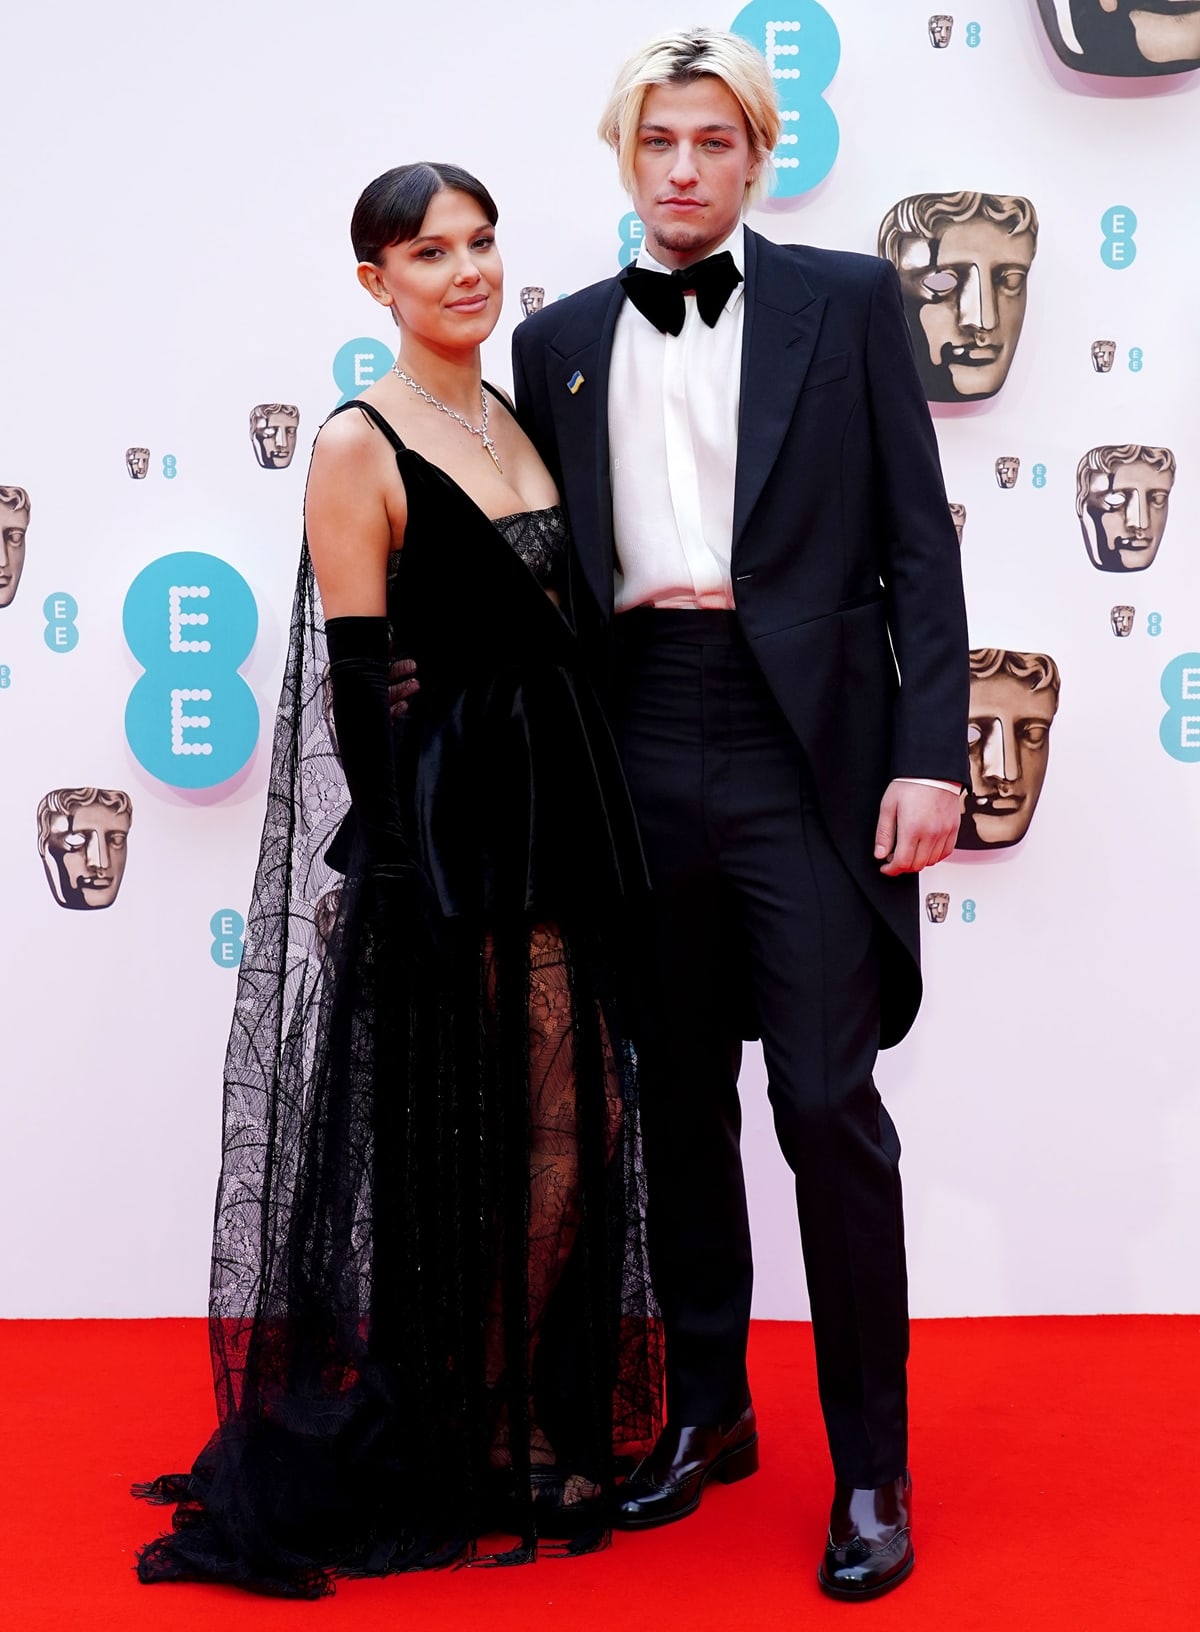 Millie Bobby Brown and her boyfriend Jake Bongiovi made their red carpet debut at the 2022 EE British Academy Film Awards